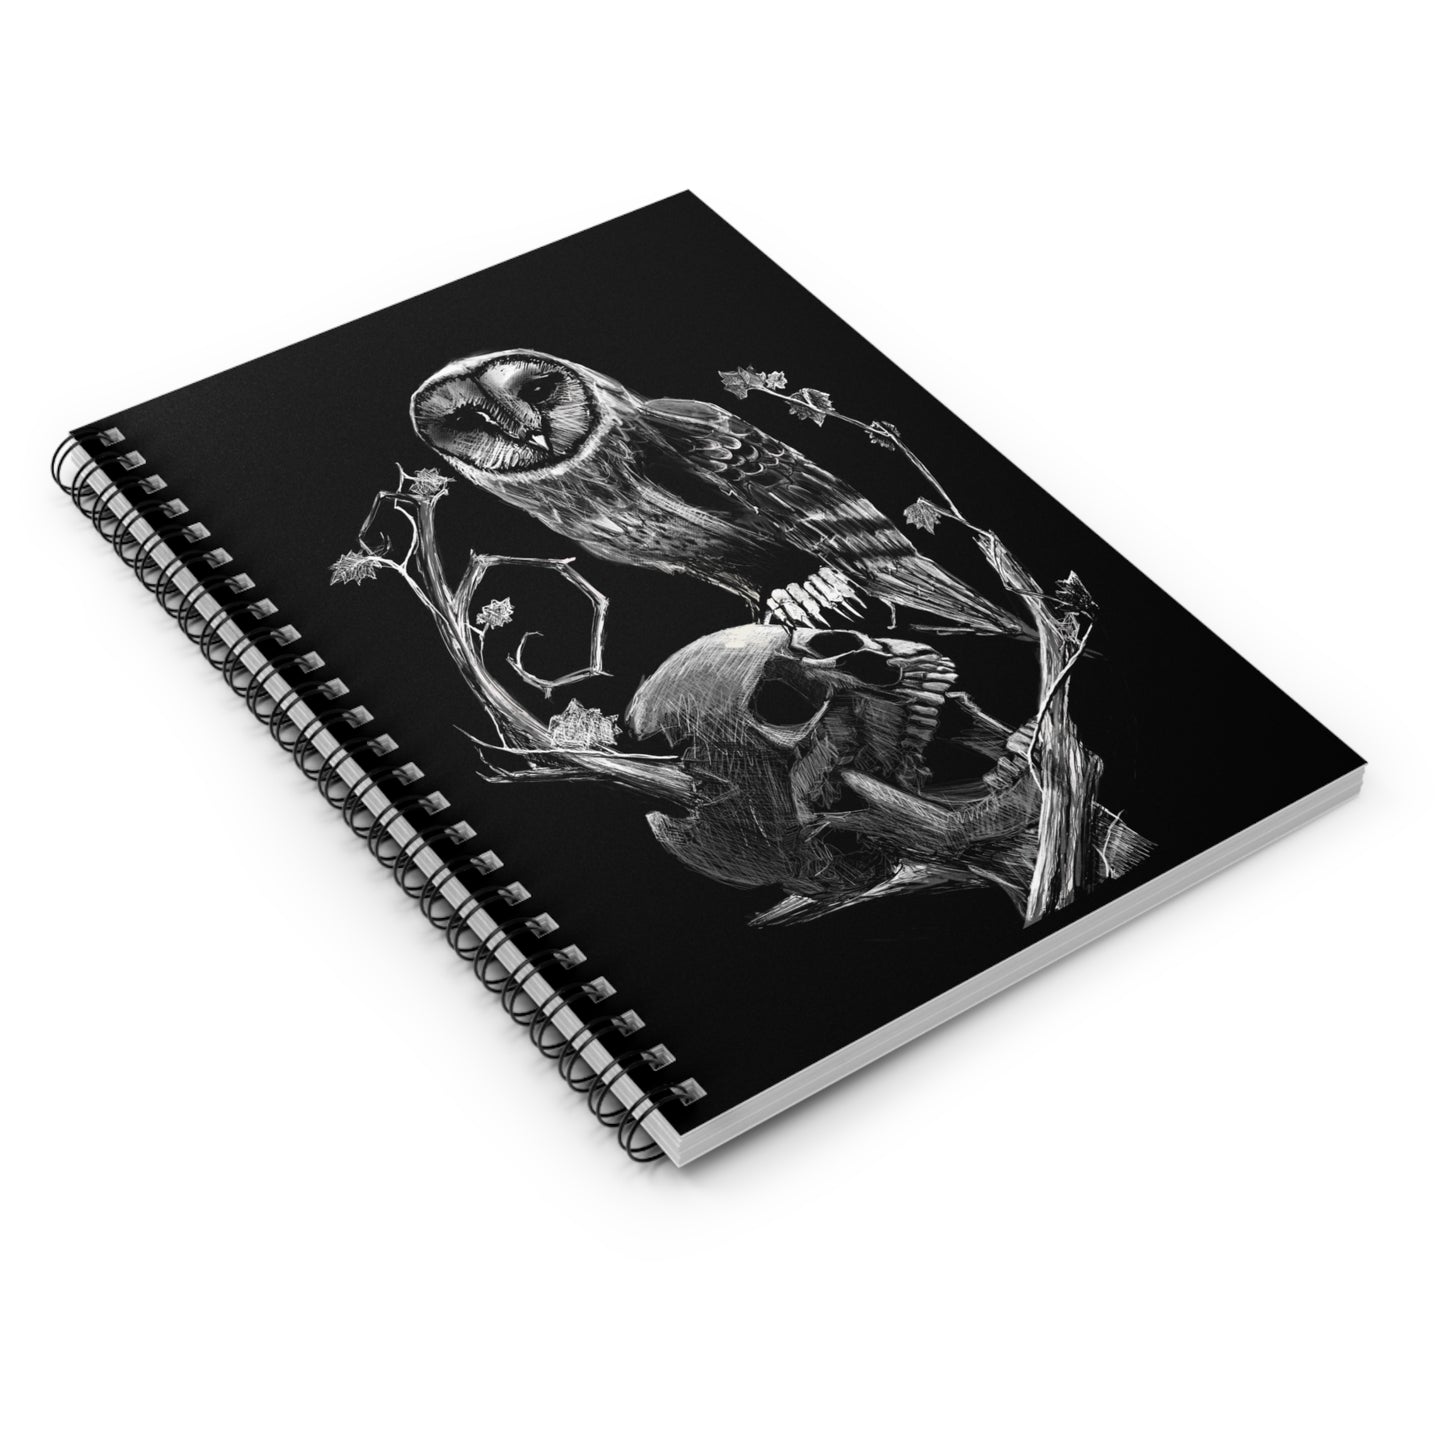 Skull and Owl Spiral Notebook - Ruled Line